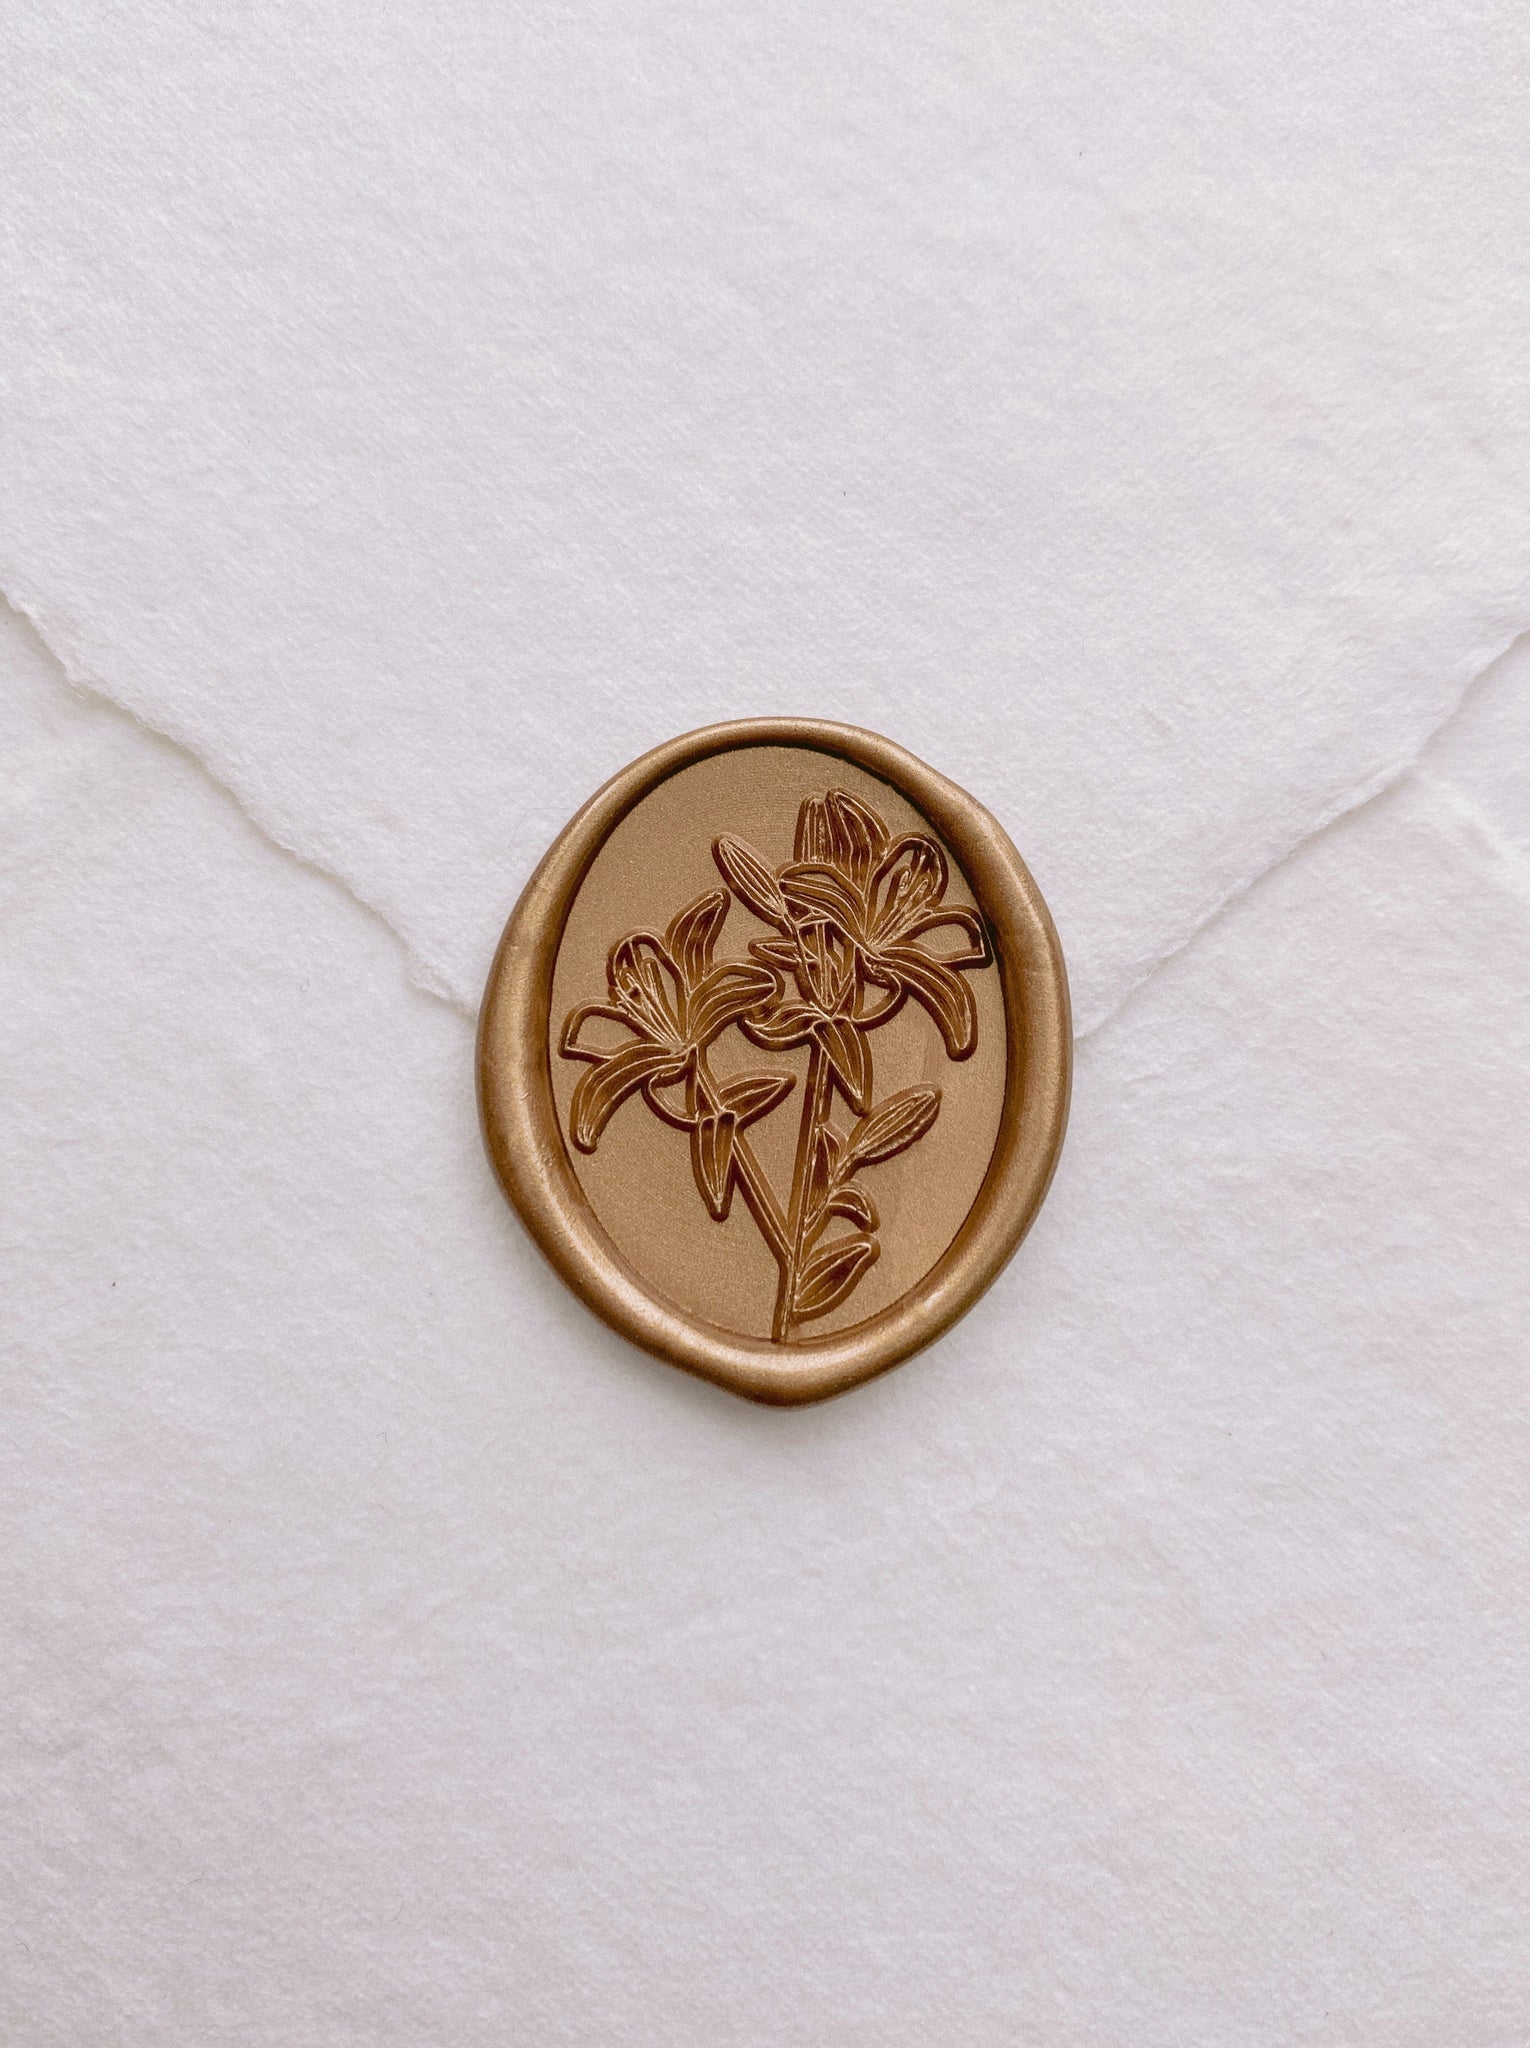 Oval lily floral wax seal in gold on handmade paper envelope_front angle